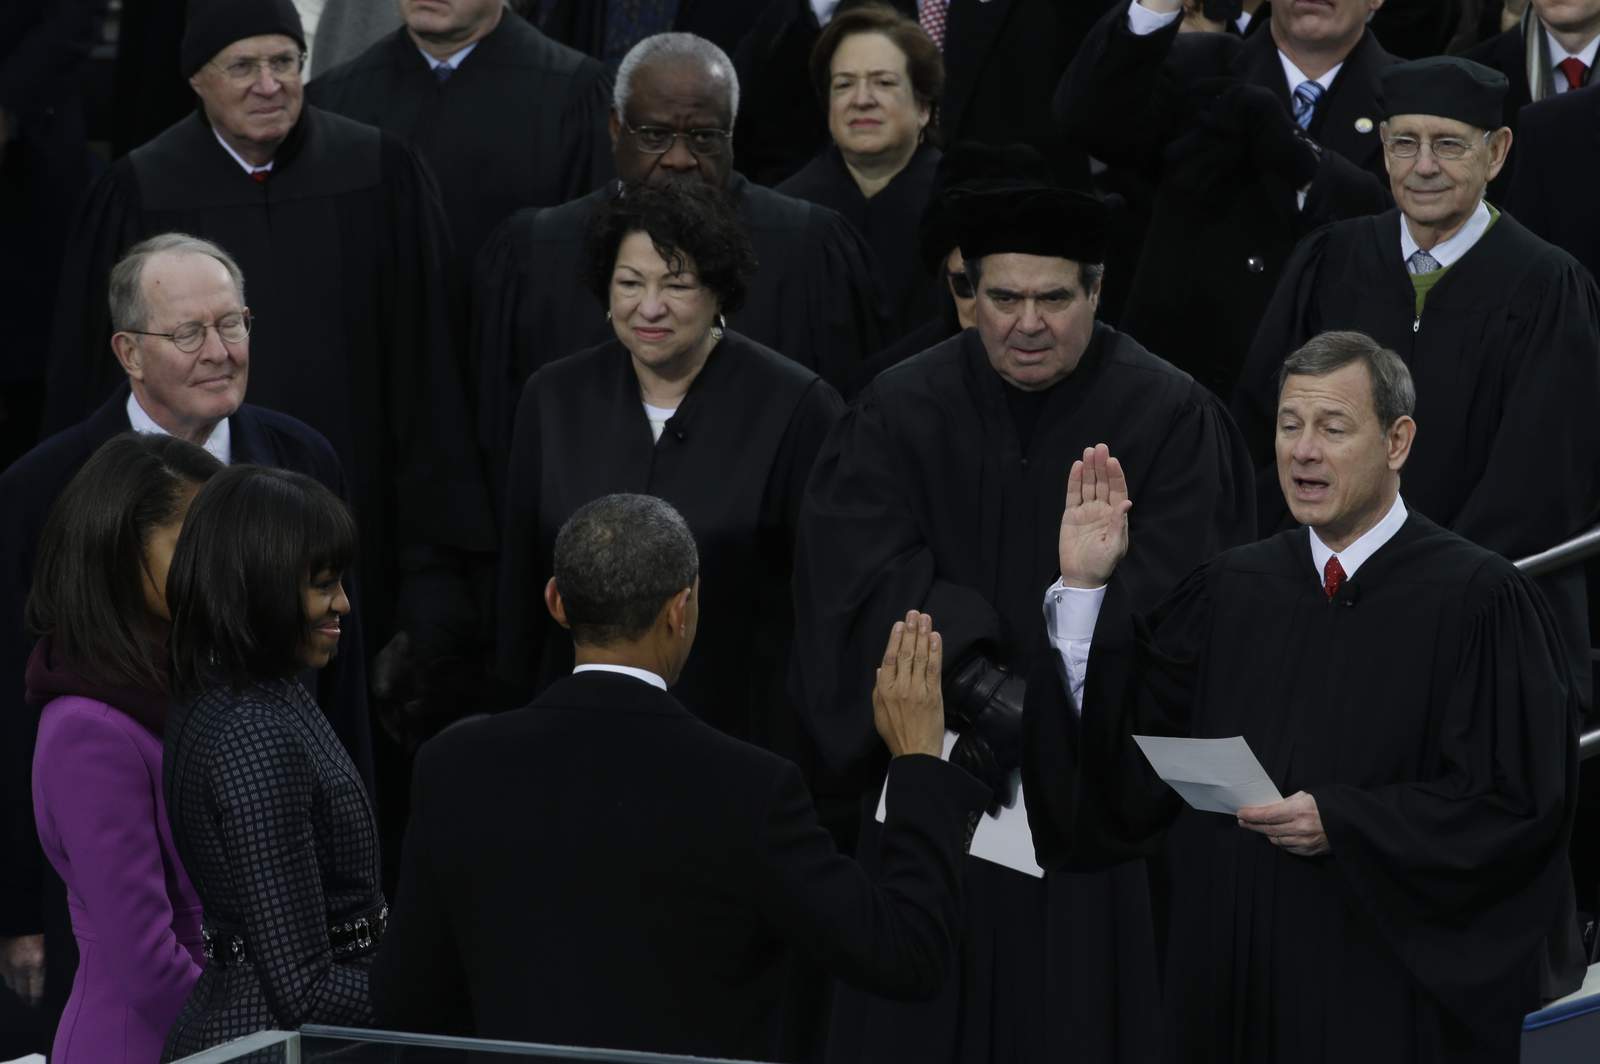 Roberts to swear in yet another president who opposed him